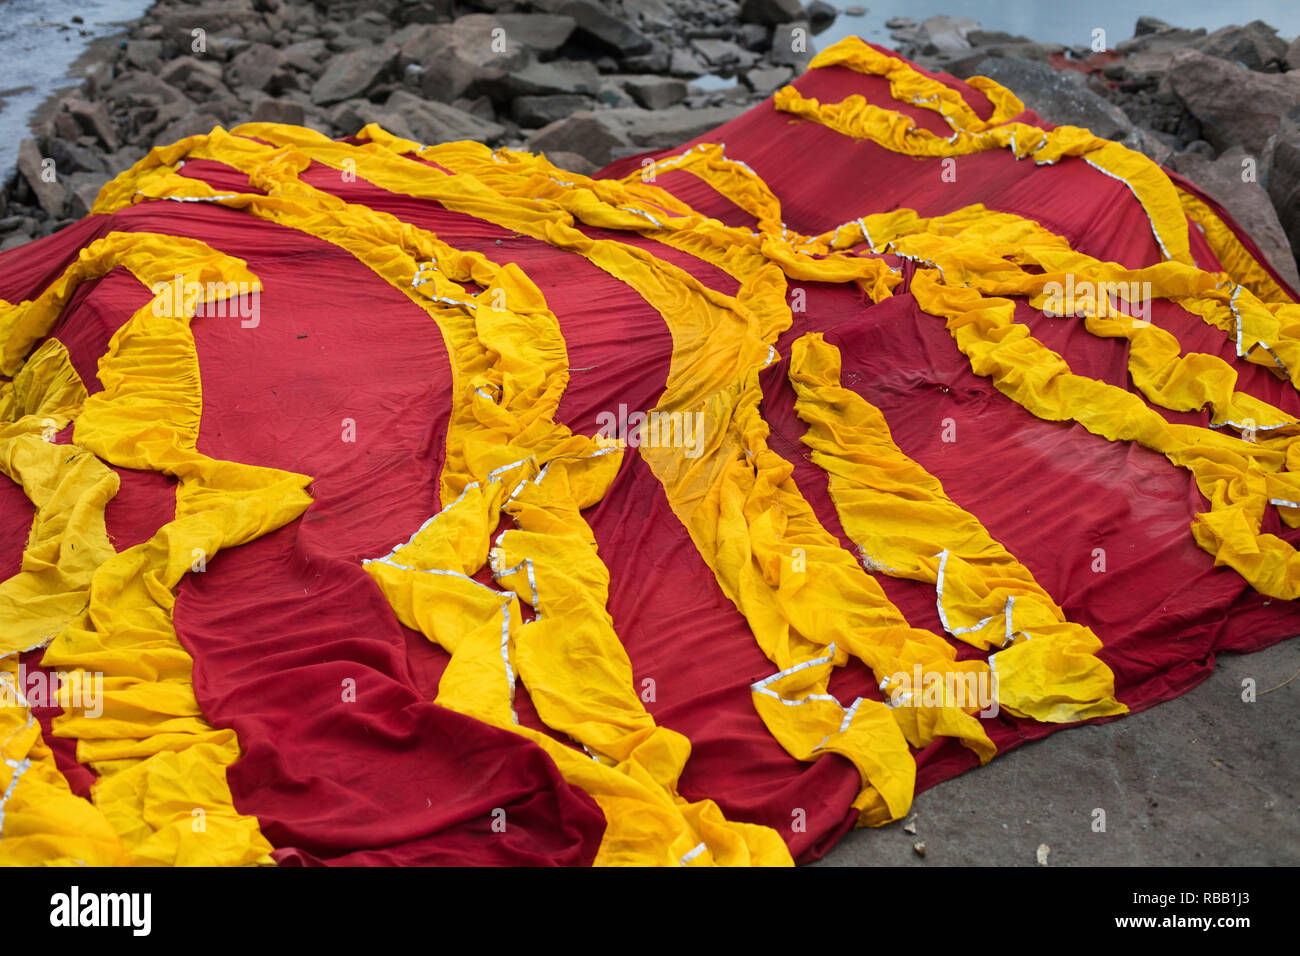 Fabric drying on stone in India Stock Photo